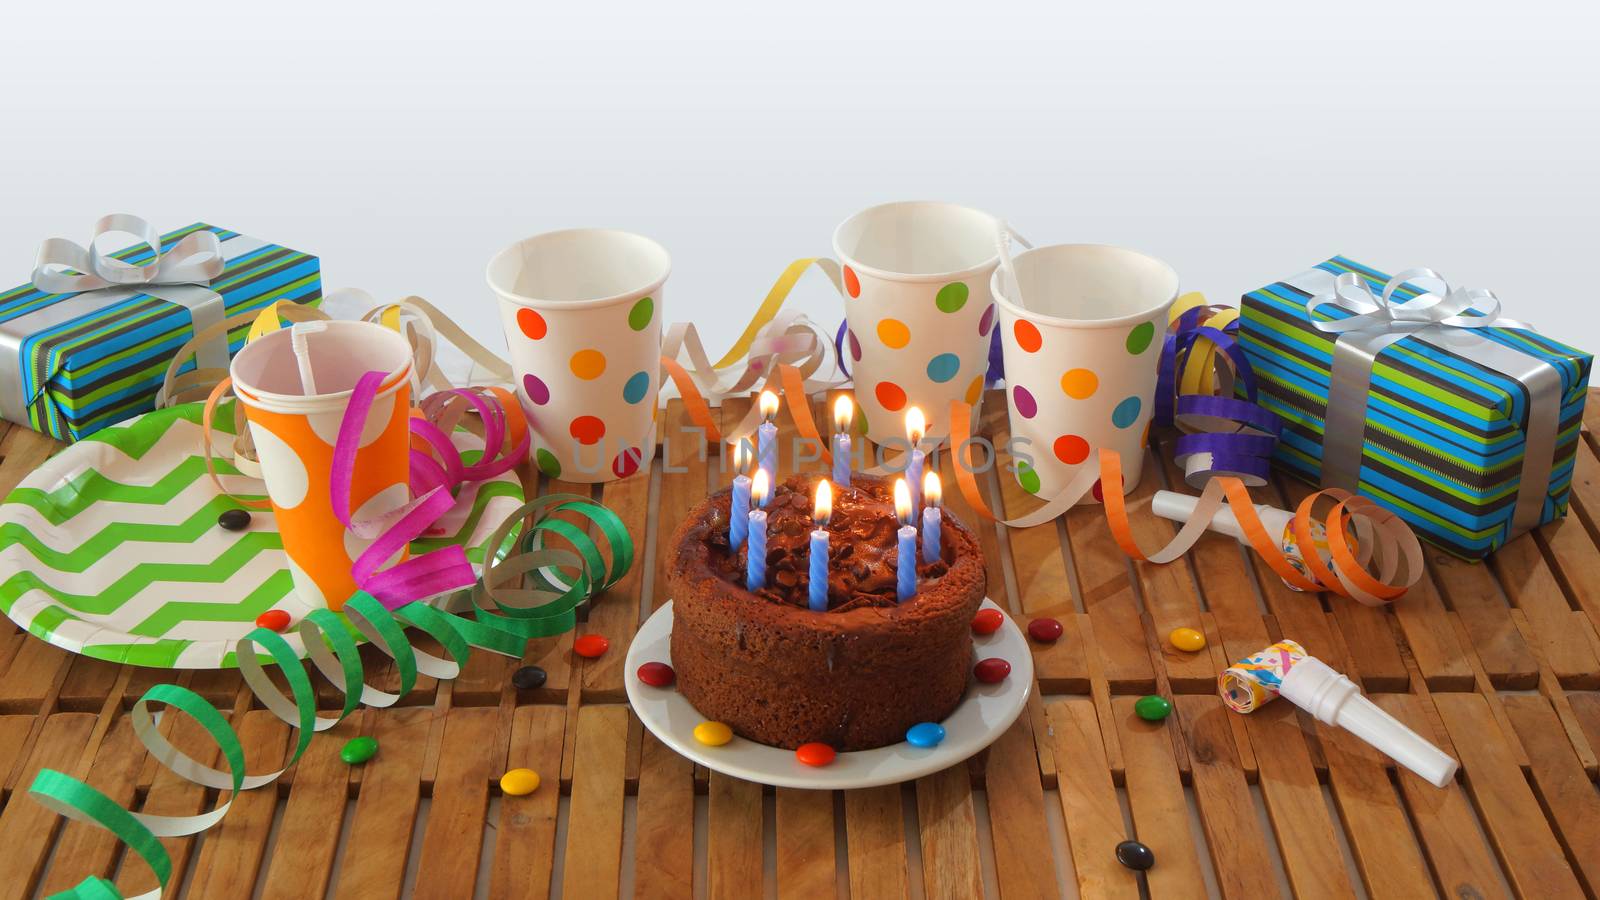 Chocolate birthday cake with a blue candles burning on rustic wooden table with background of colorful streamers, gifts, plastic cups with candies and white wall in the background